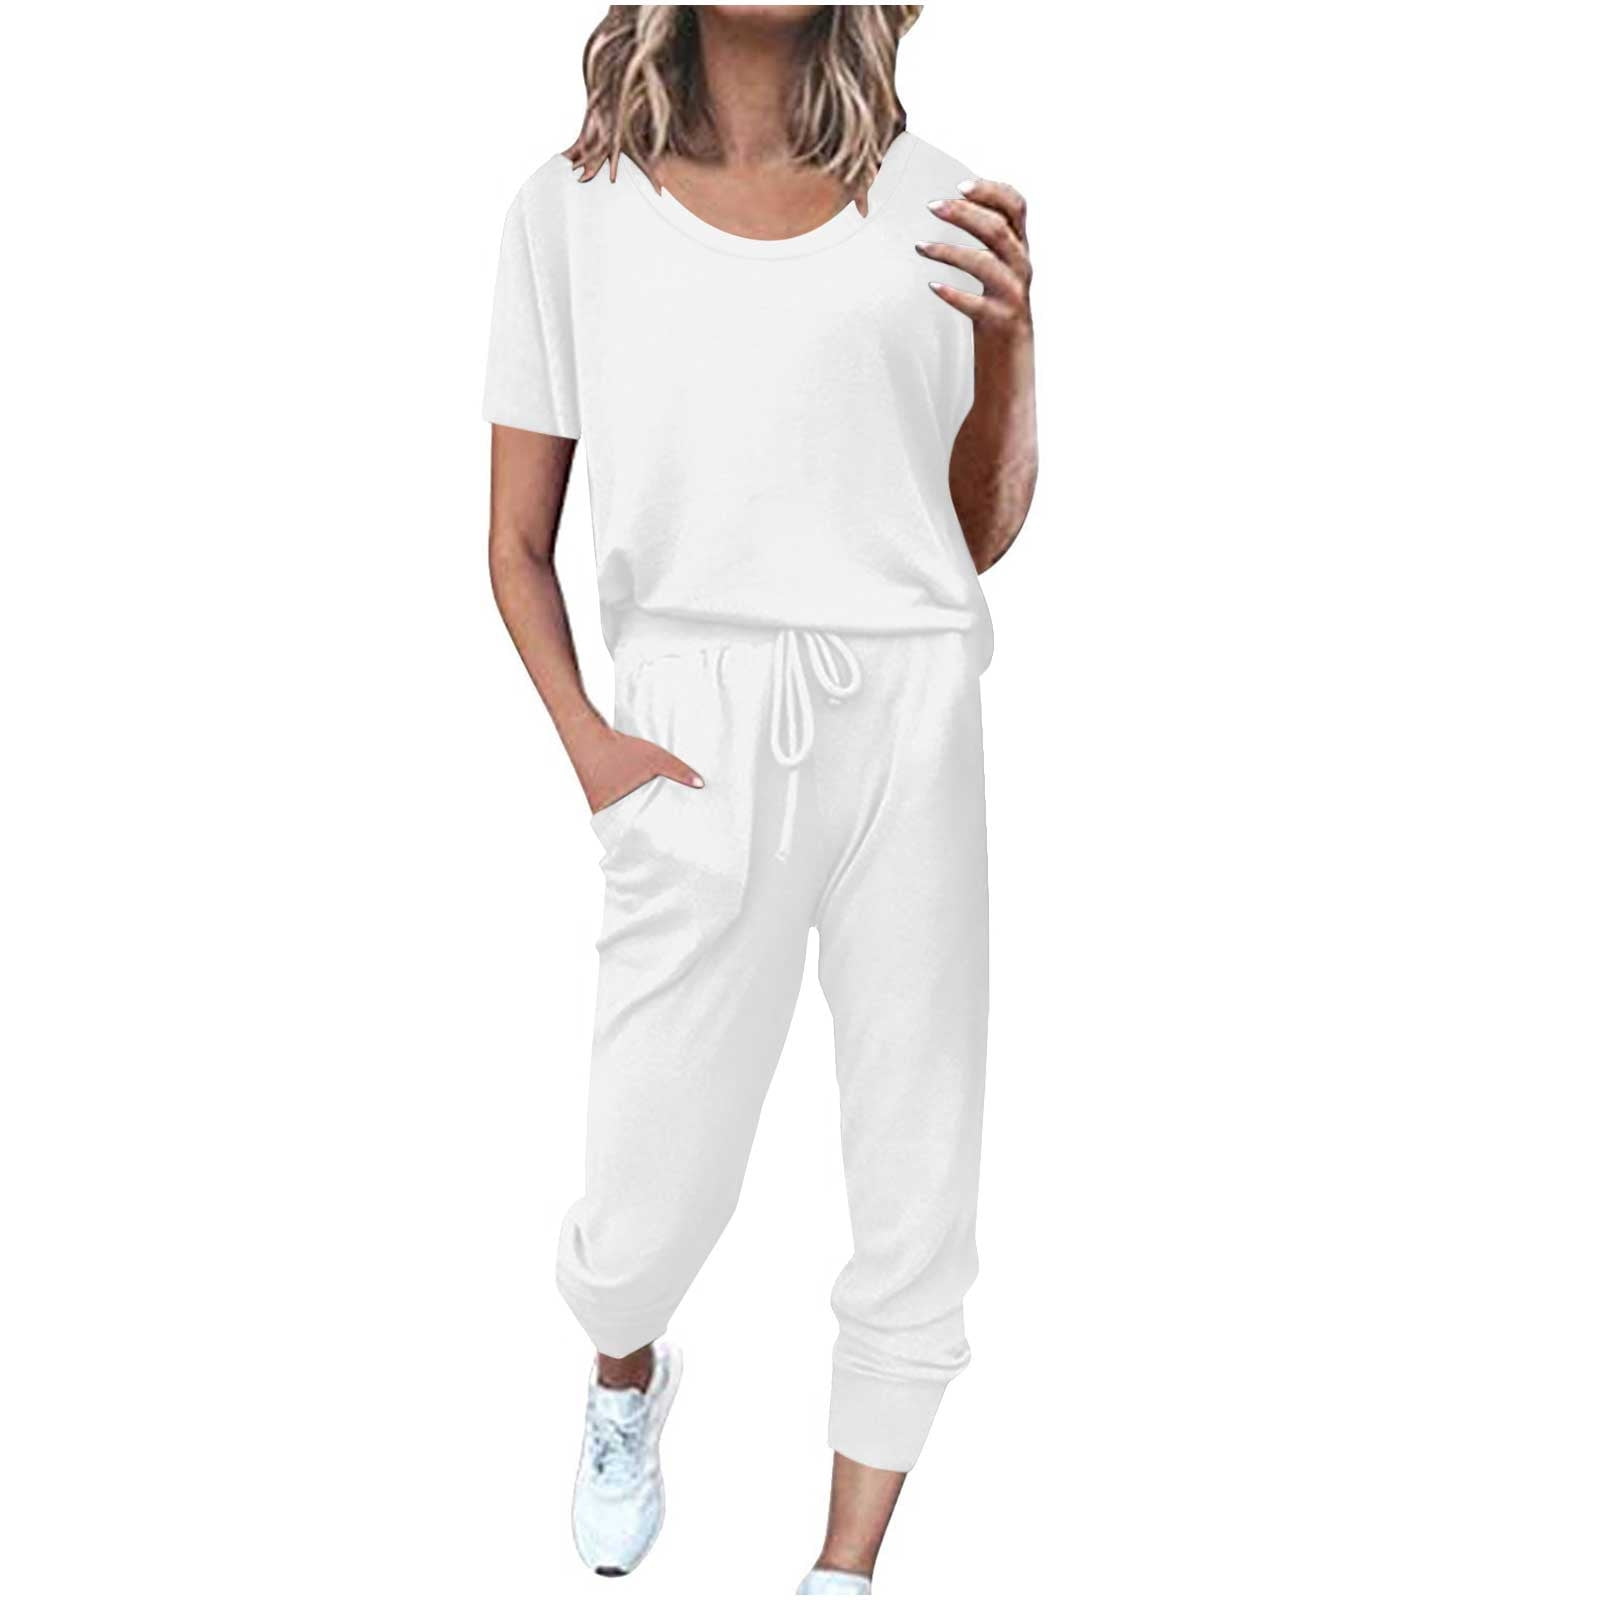 2 Piece Summer Outfits for Women Casual Lounge Sweatsuits Short Sleeve ...